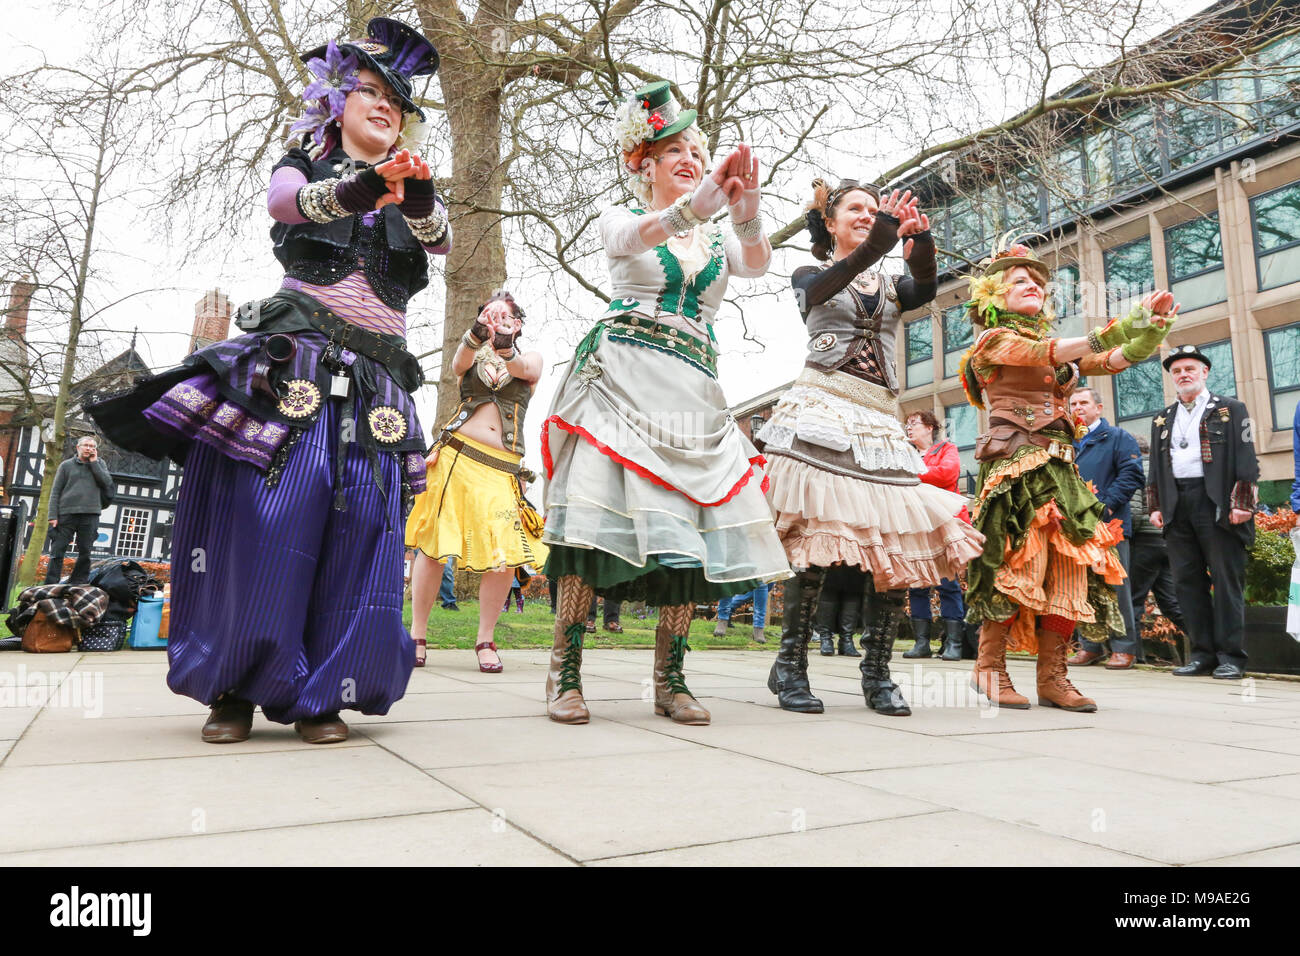 Women performing a steampunk dance. Steampunk is a style of fashion that combines historical elements and anachronistic technology, often inspired by Edwardian science fiction. Peter Lopeman/Alamy Live News Stock Photo